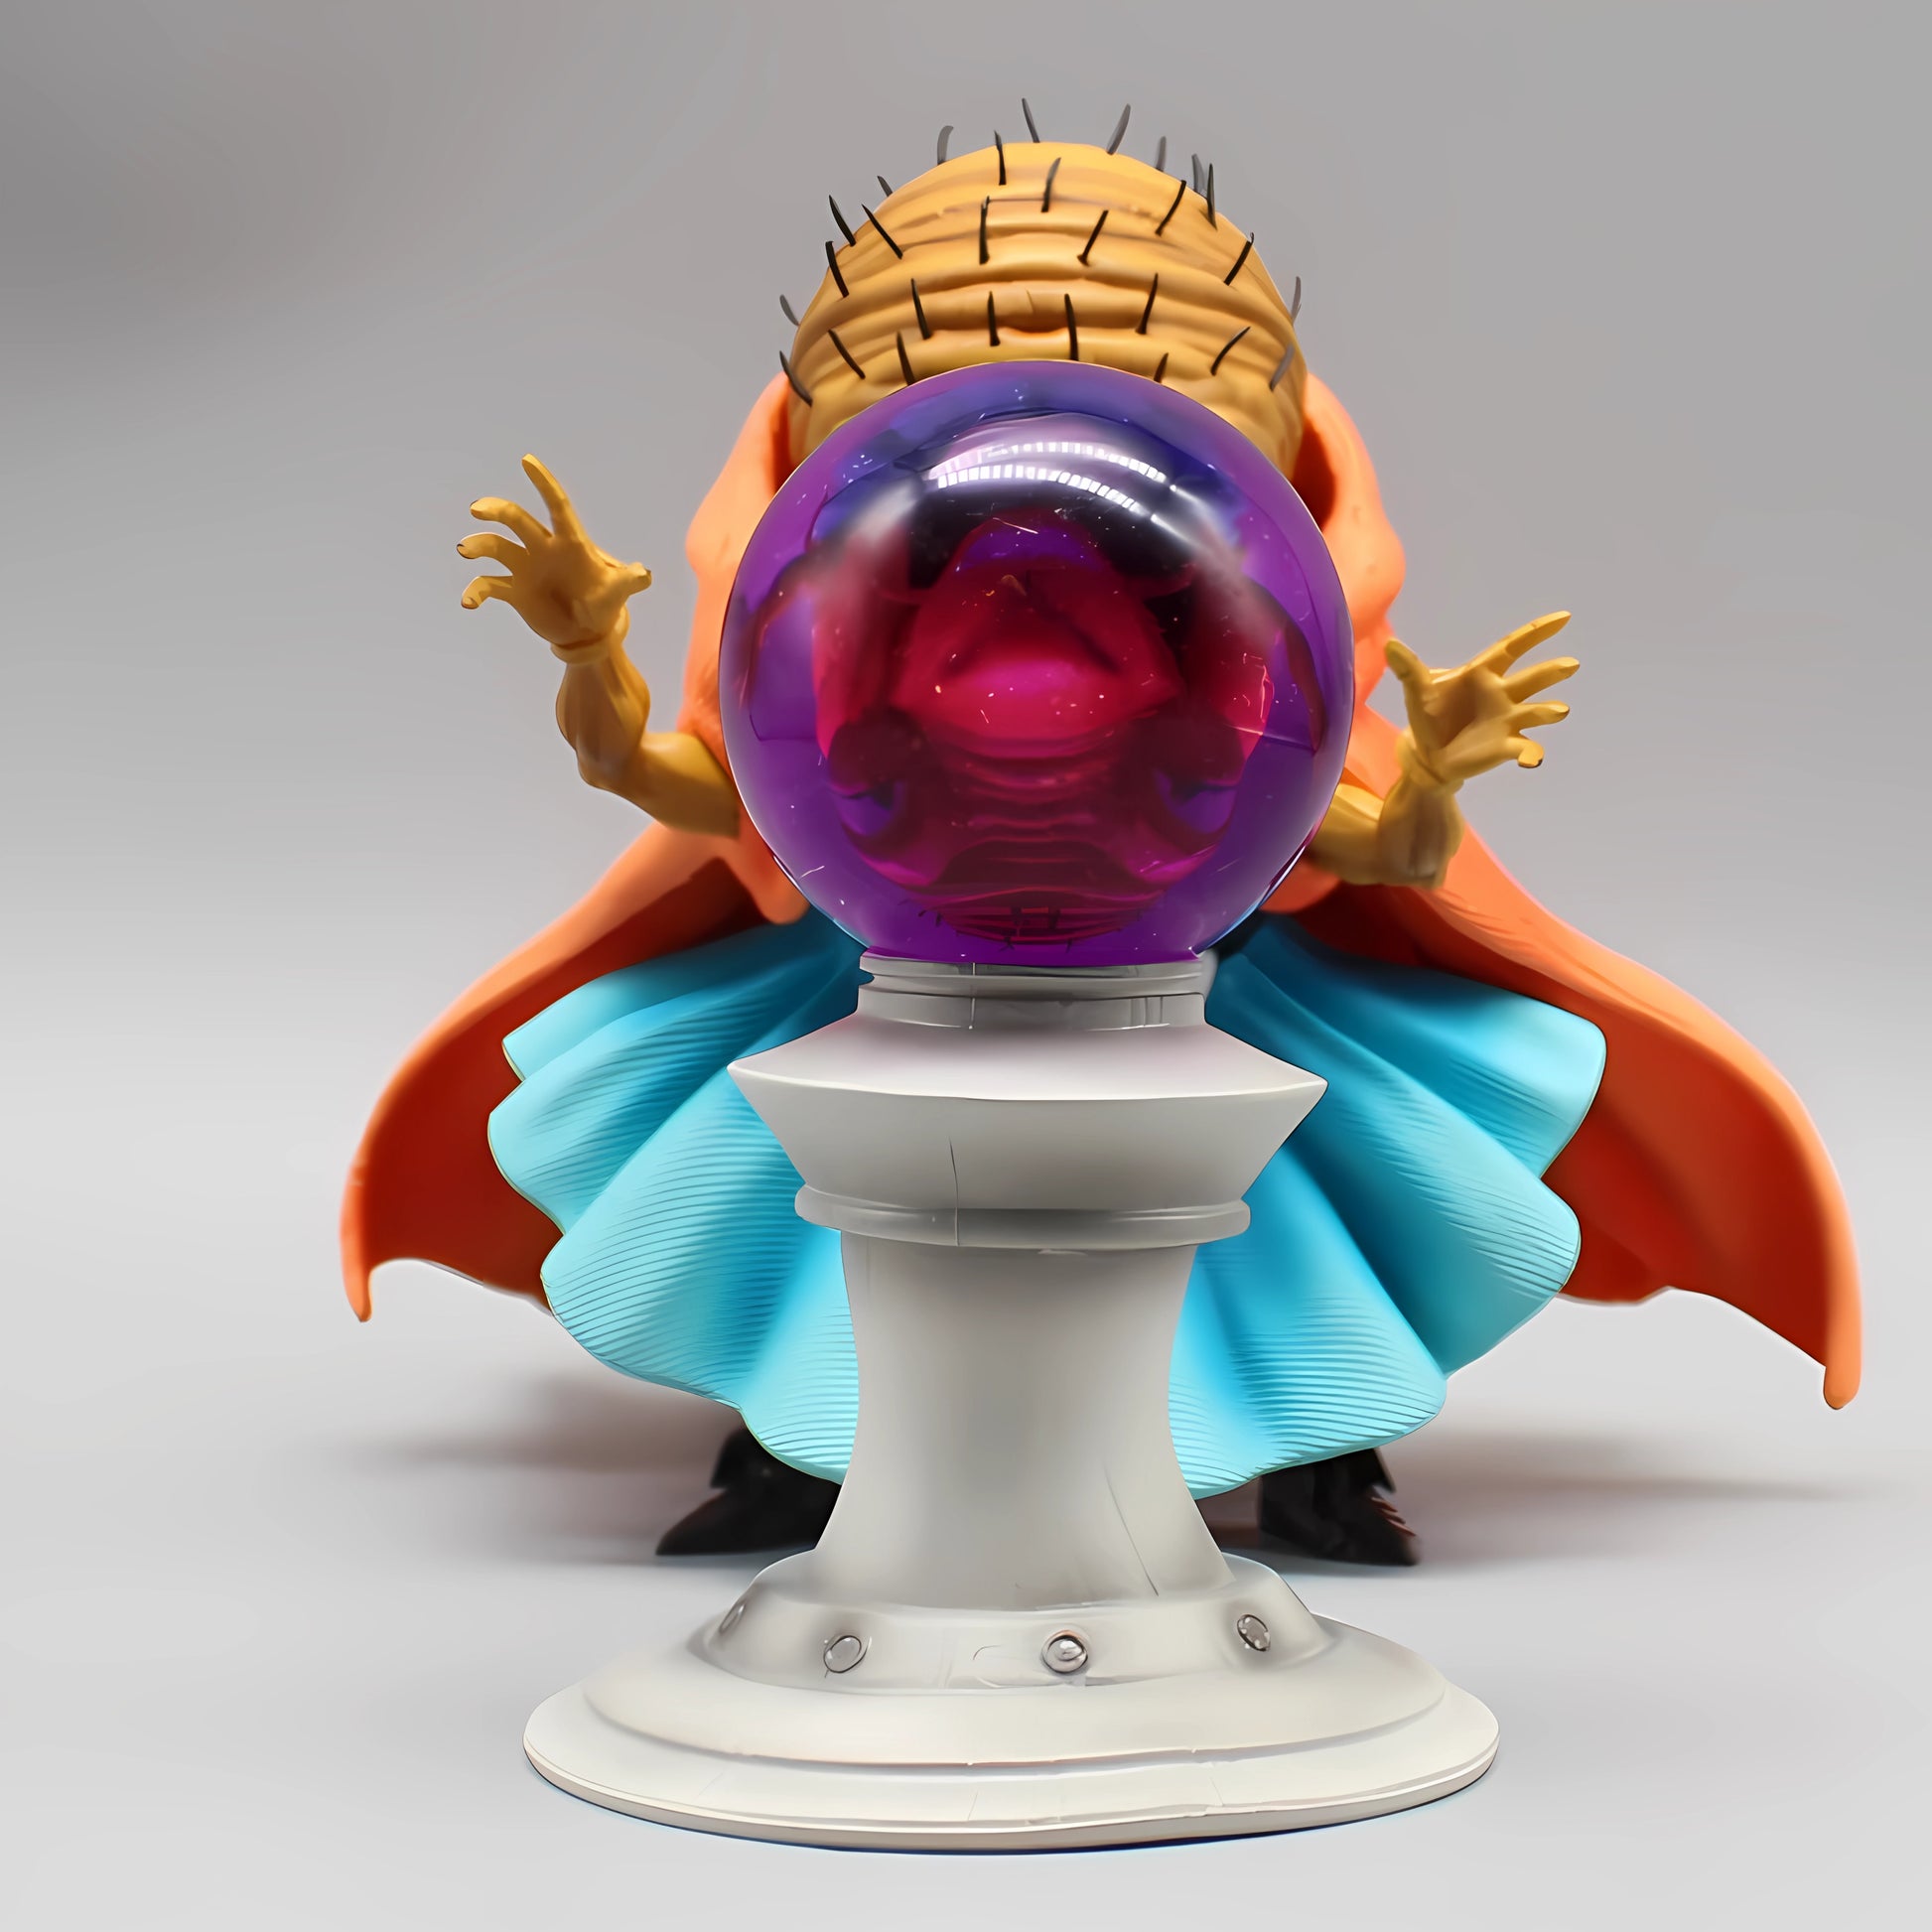 Babidi, the Dragon Ball sorcerer, fixated on the mystical energies of a glowing purple orb, a detailed collectible figure for Dragon Ball fans.